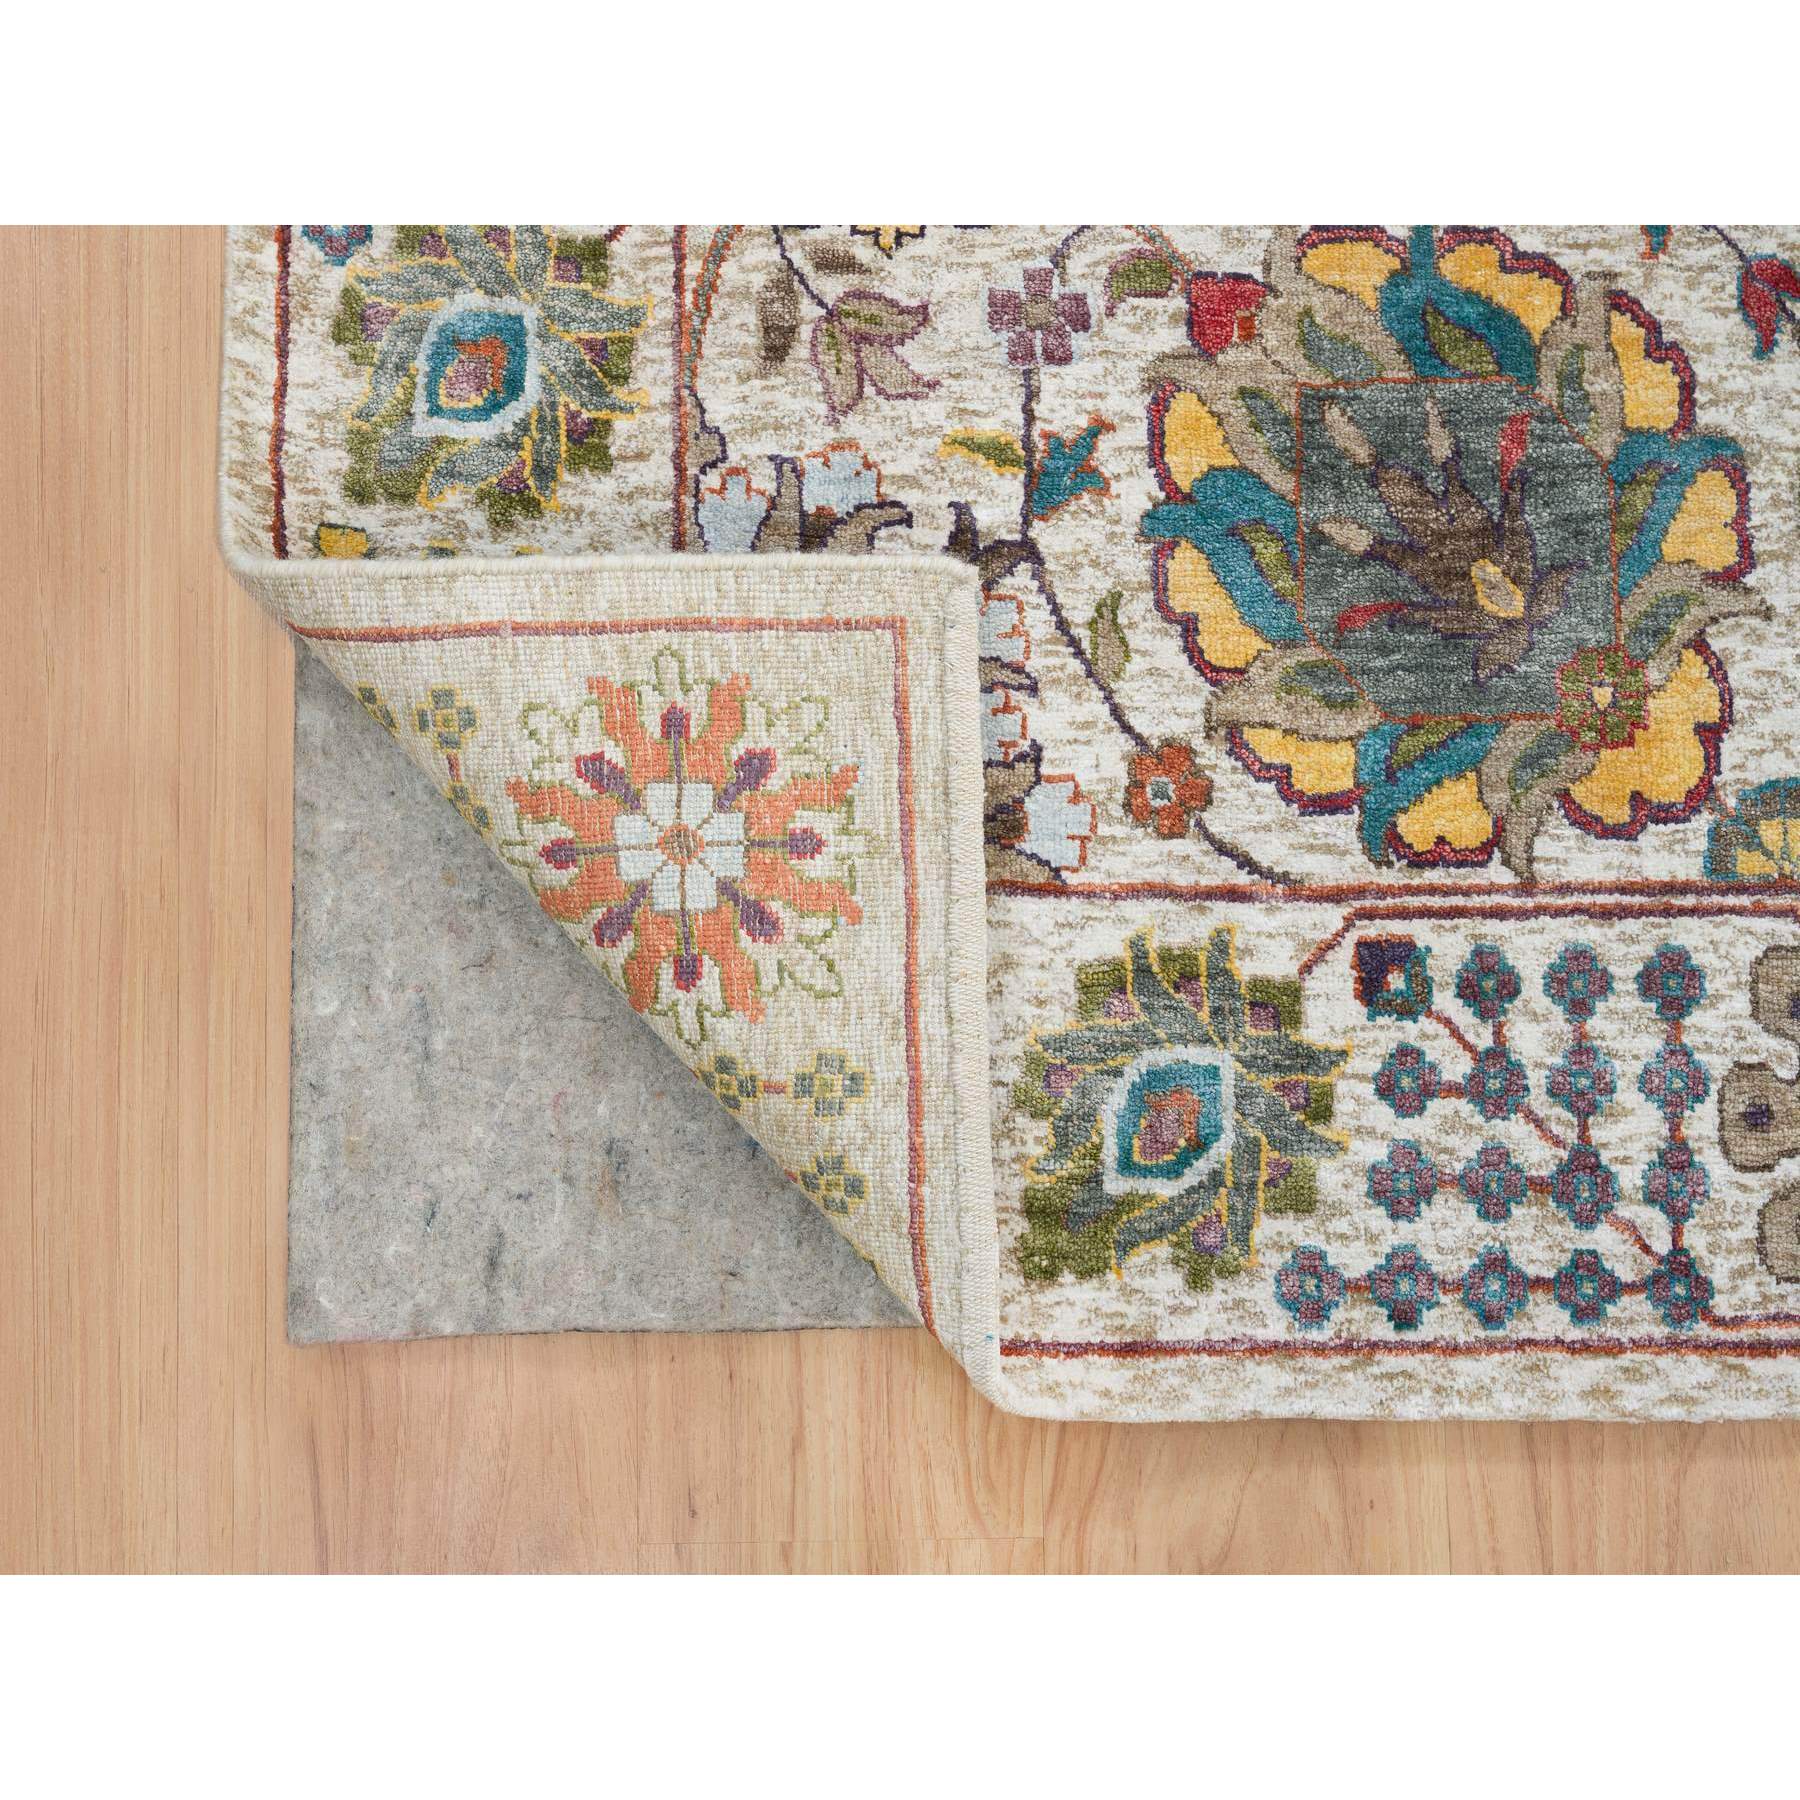  Silk Hand-Knotted Area Rug 10'2